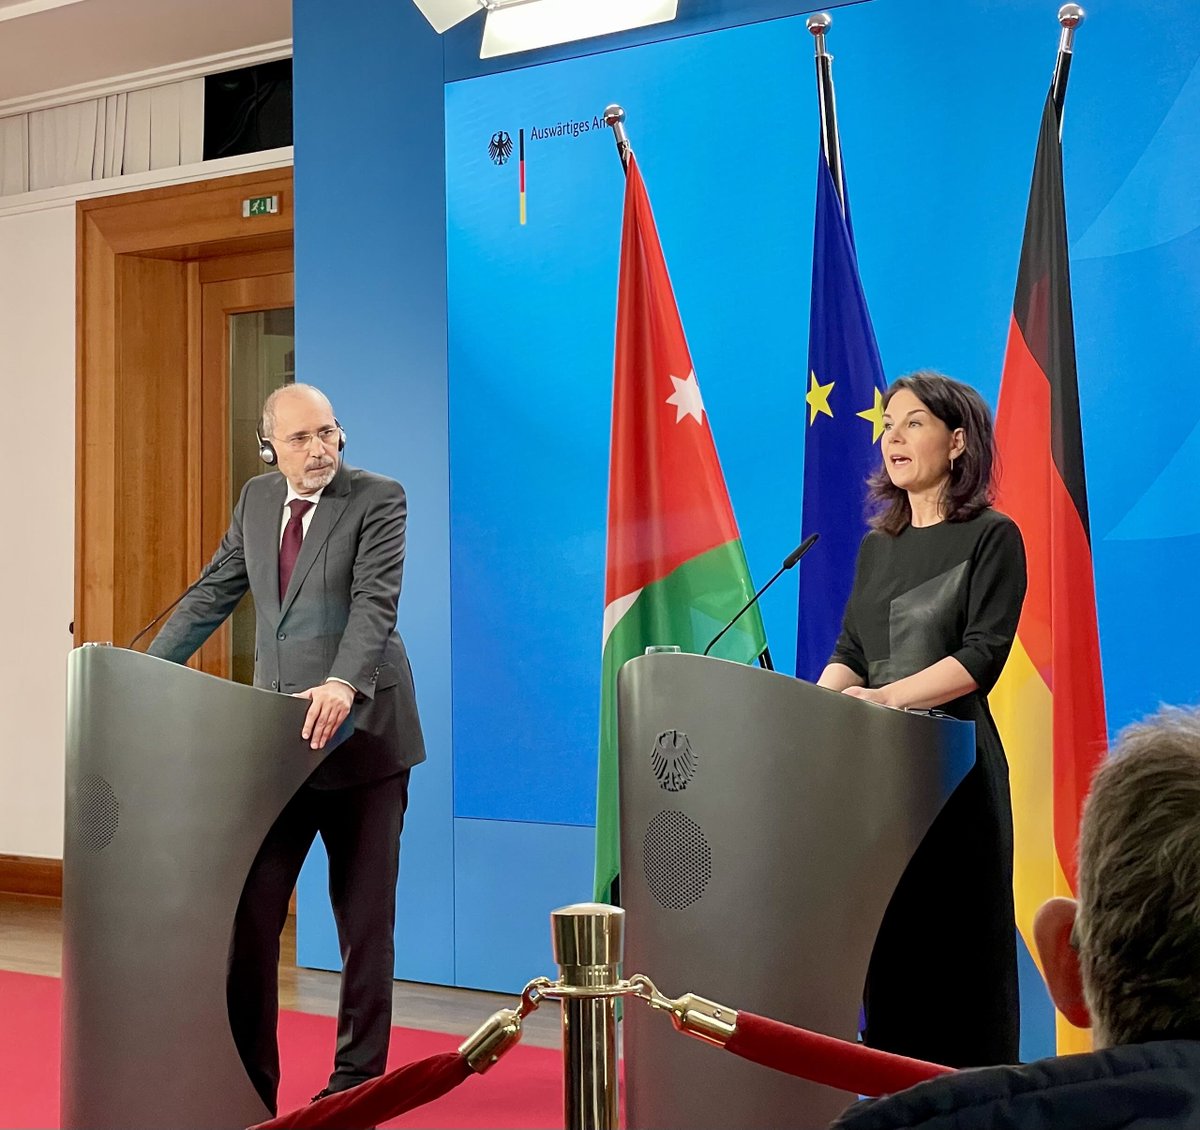 De-escalation attempt: Annalena Baerbock will travel to Israel this afternoon.We will talk about how further escalation can be prevented&quot;, the German Foreign Minister said at presser with Jordan's Ayman Safadi.She added that the EU must &quot;finally&quot; agree new Iran sanctions